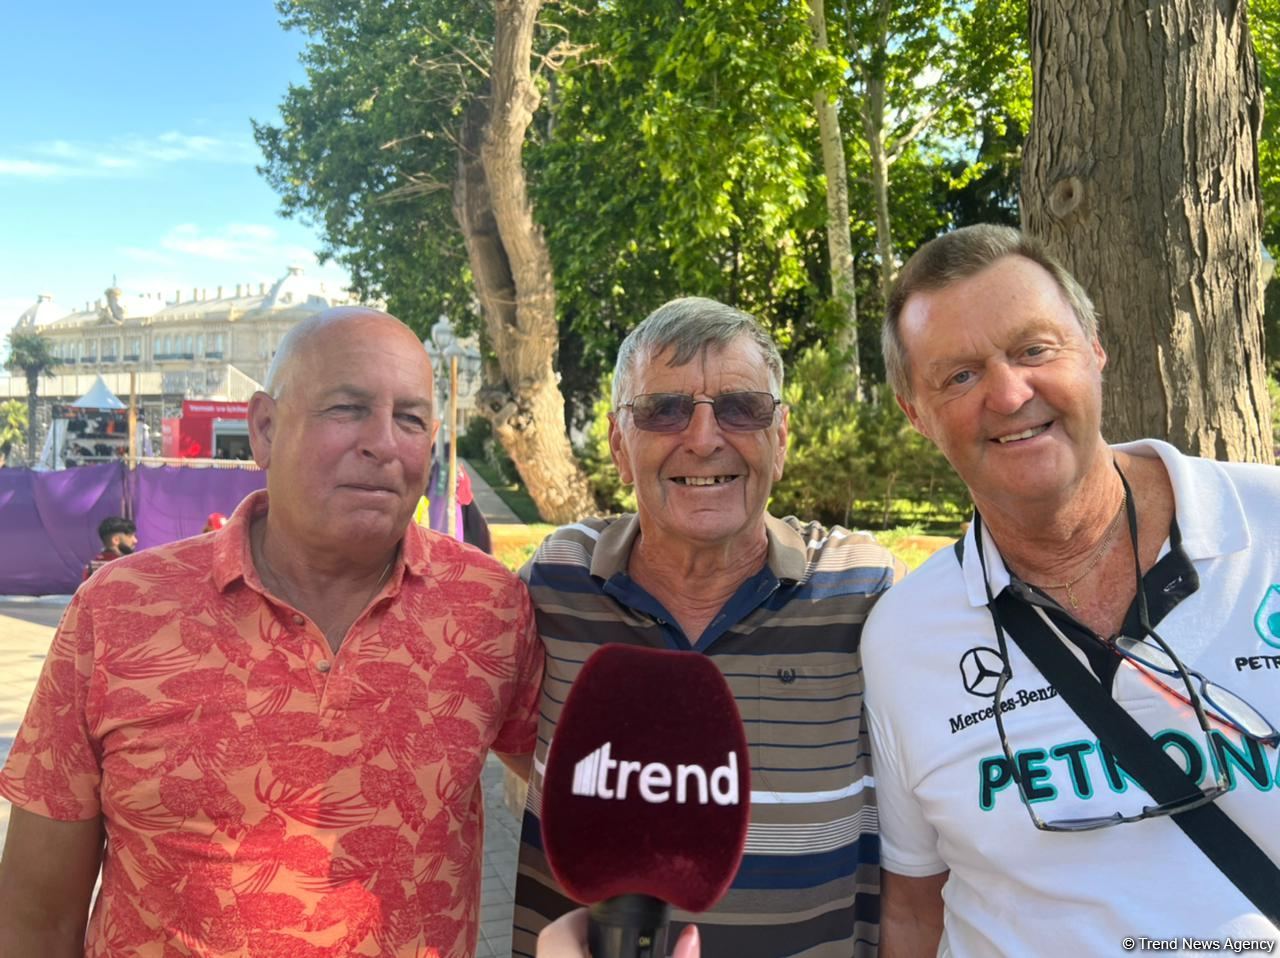 UK fans share their emotions from Formula 1 Grand Prix in Baku